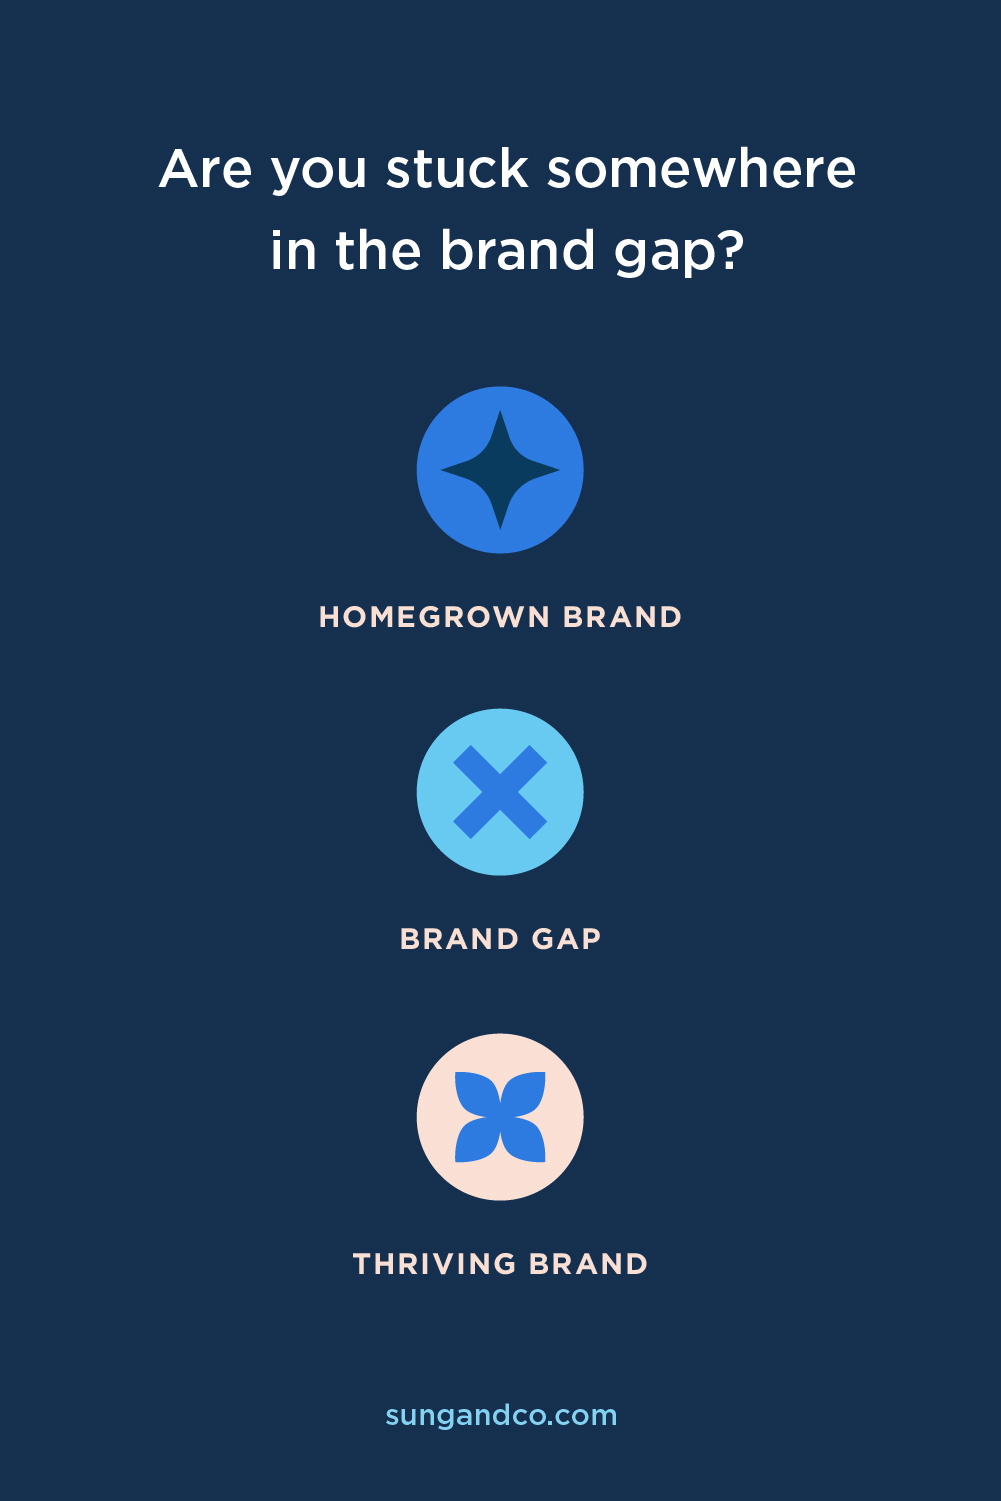 Want to be proud of your brand and make it work for your business? Get out of the brand gap with Sung and Co brand strategy.